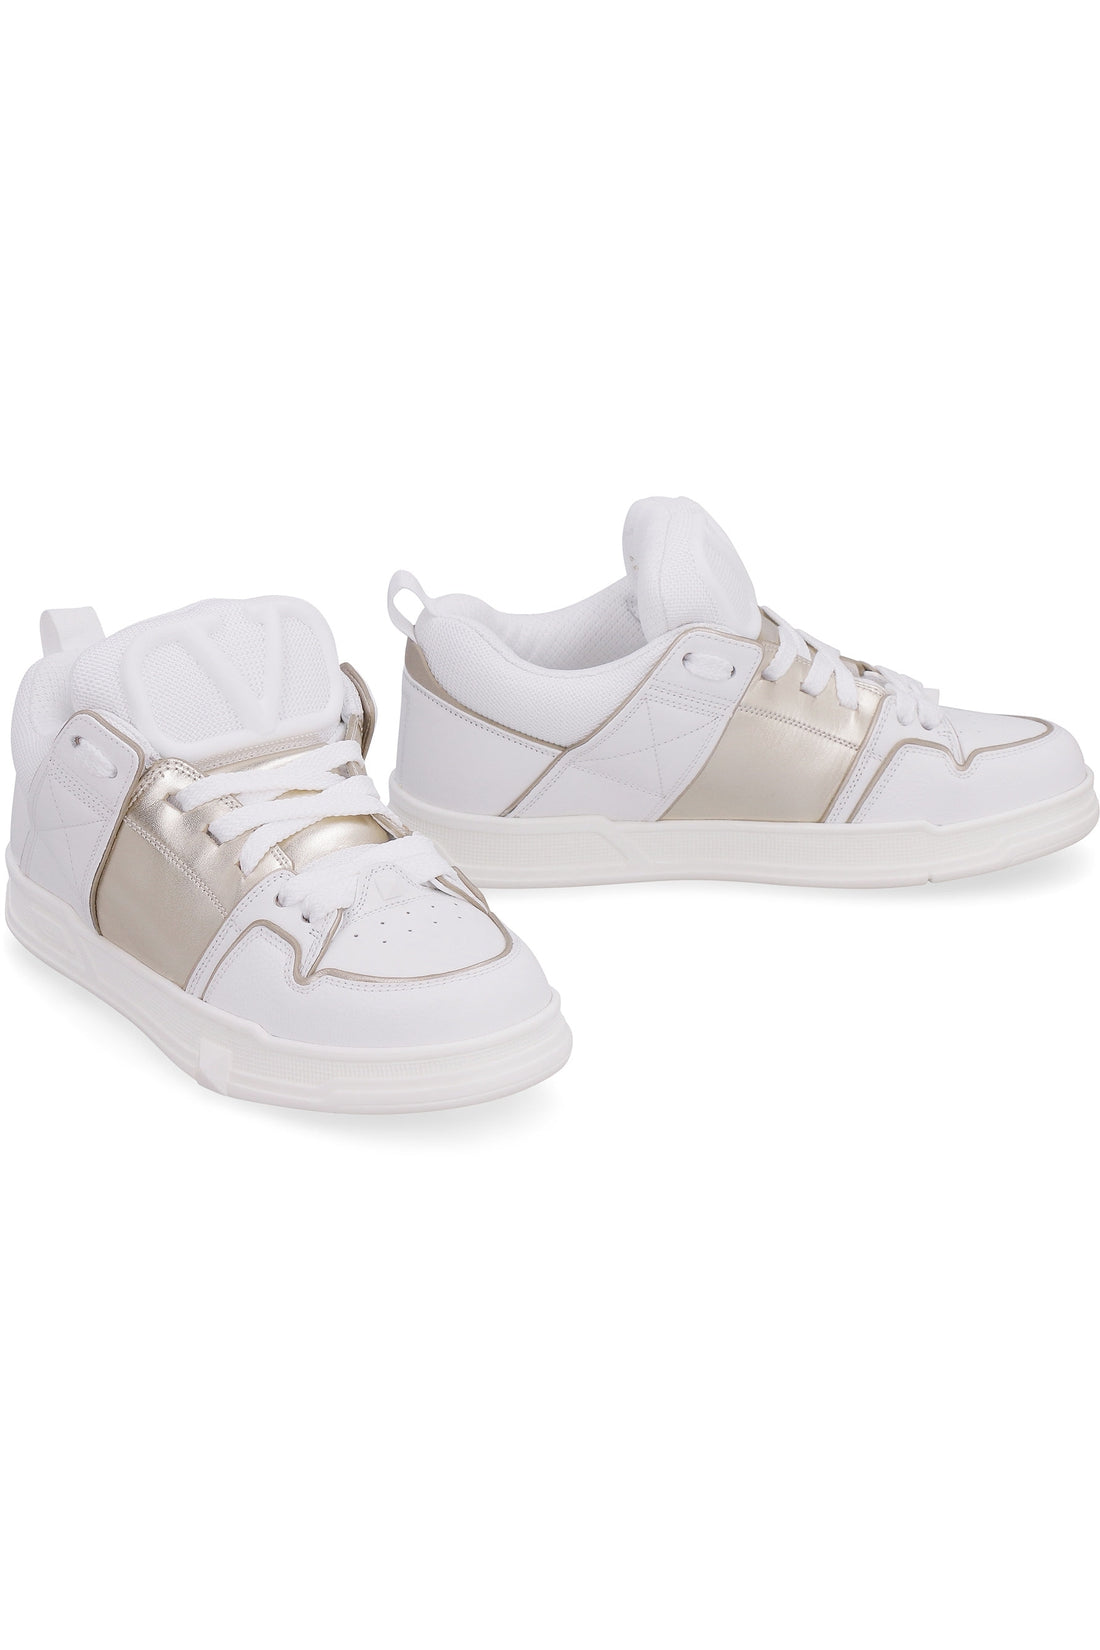 Valentino-OUTLET-SALE-Open Skate leather low-top sneakers-ARCHIVIST